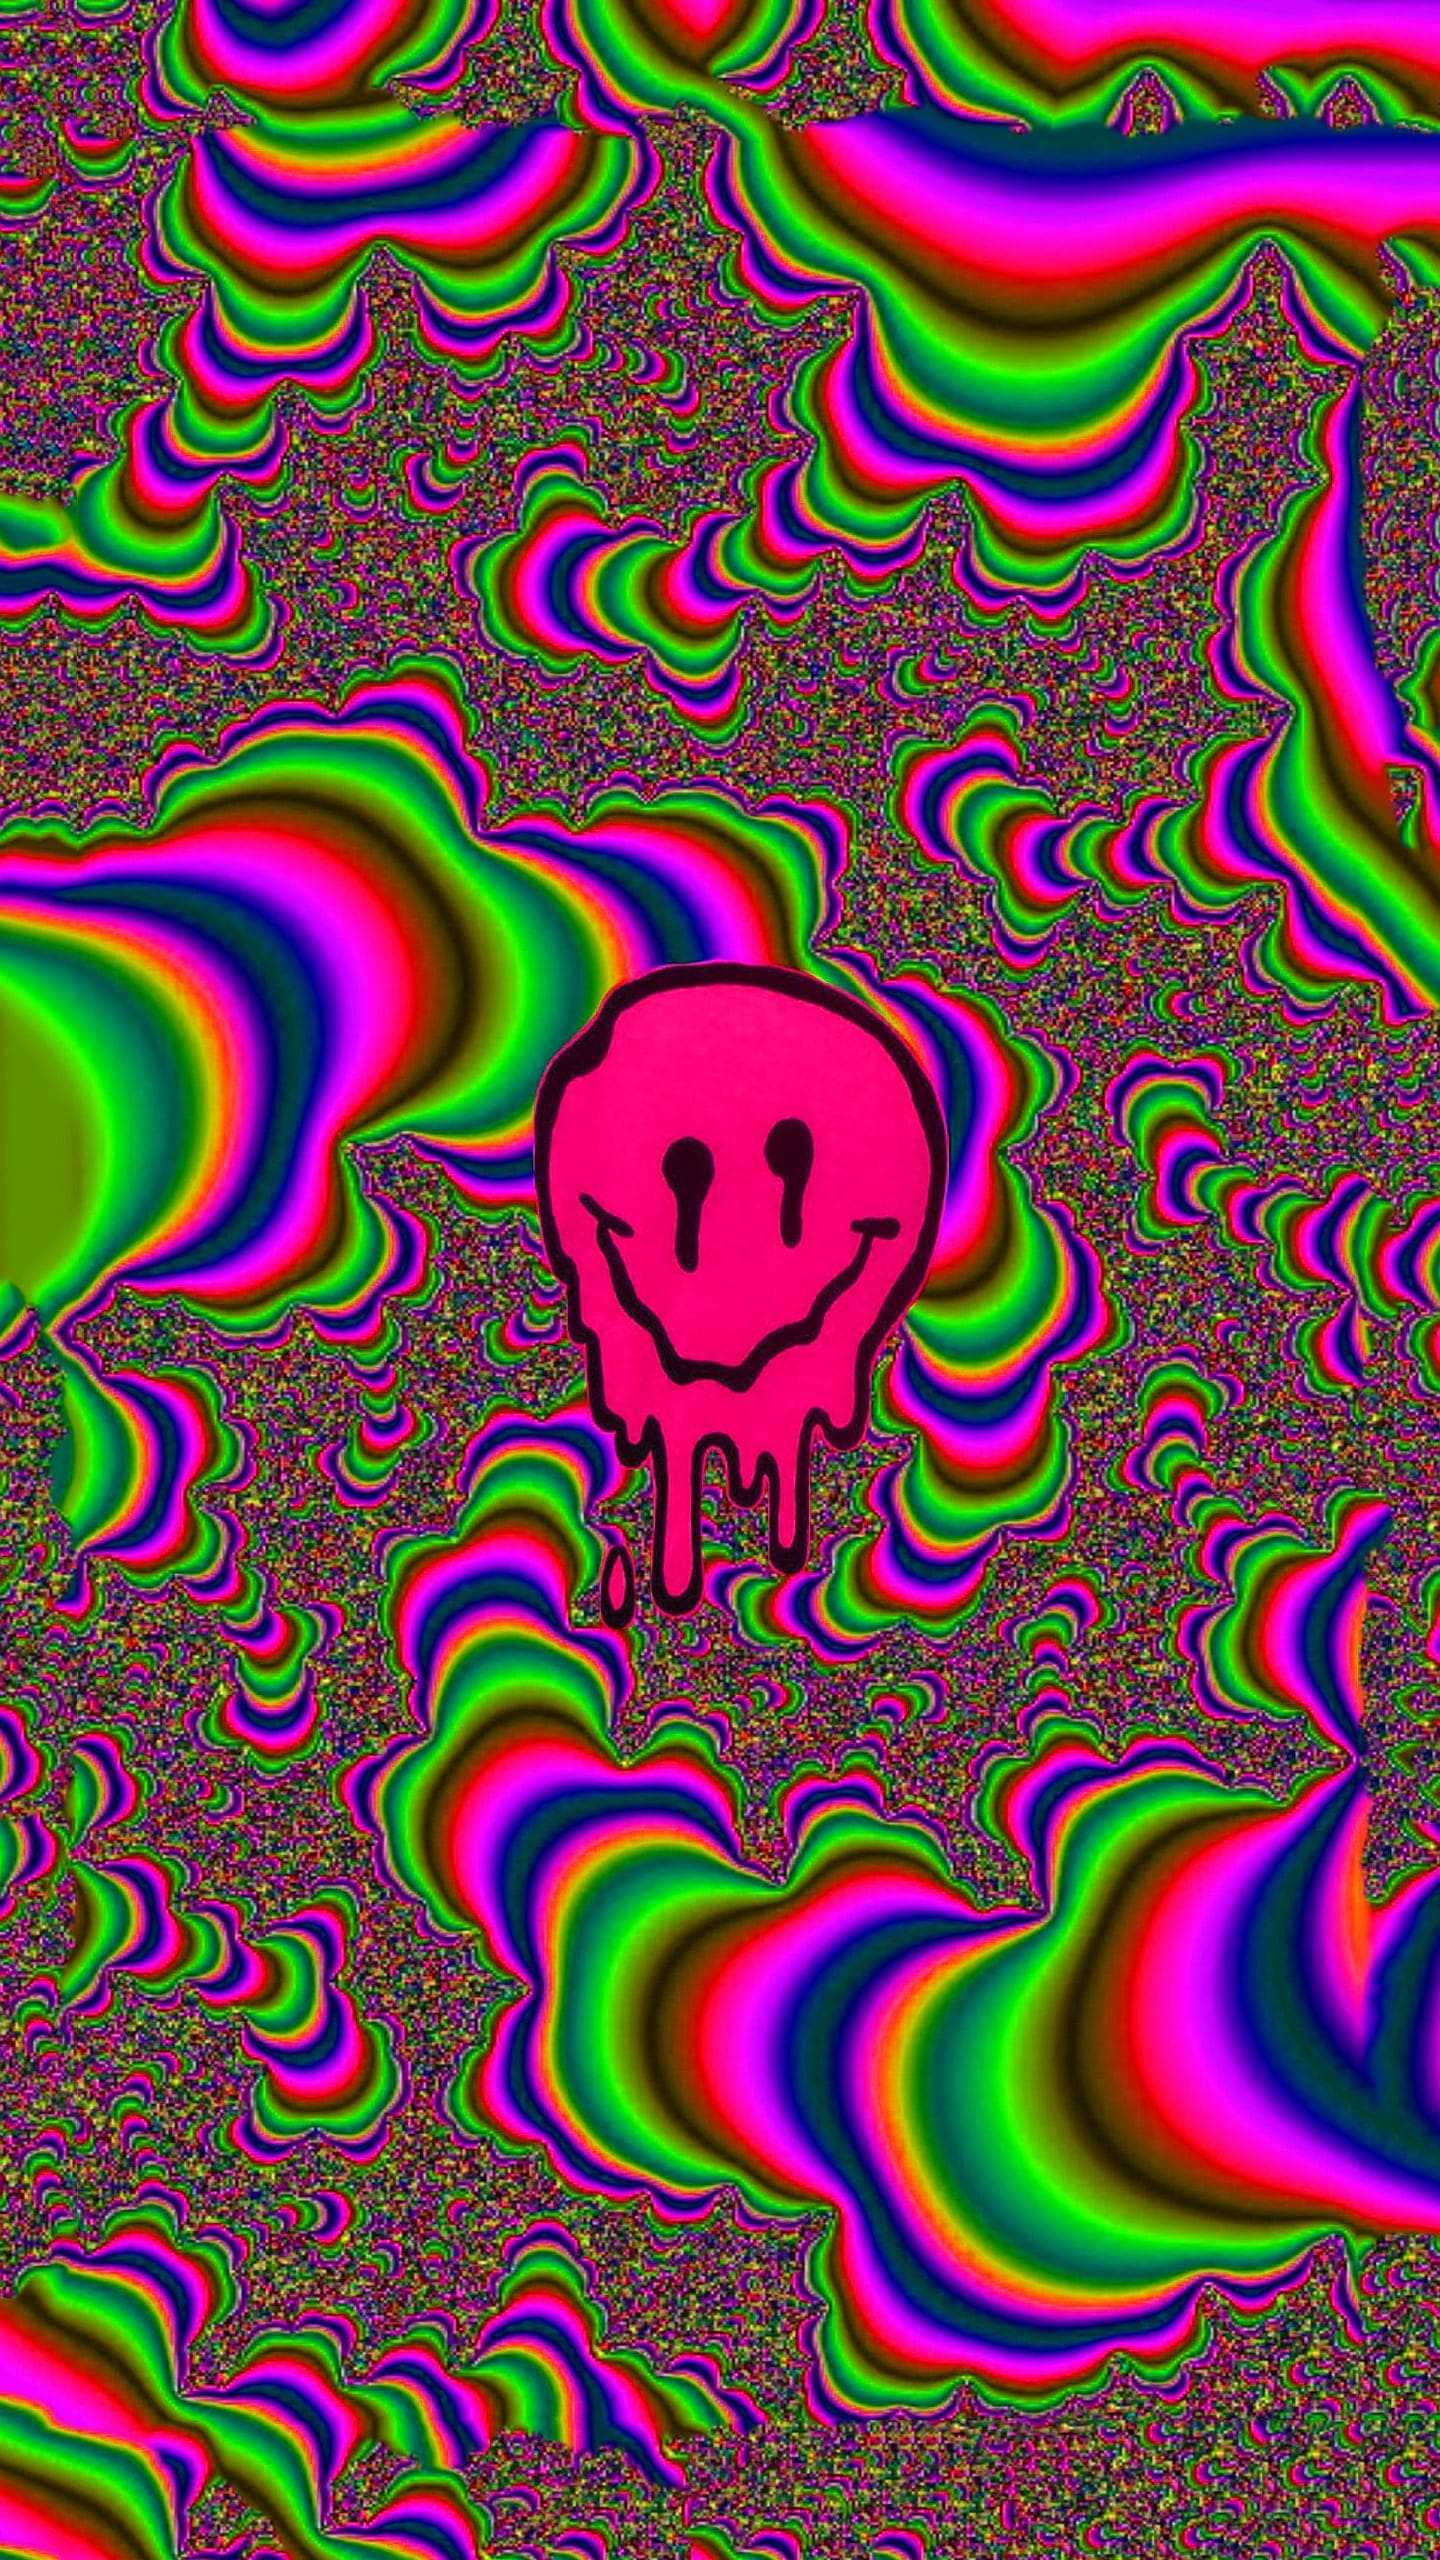 A pink smiley face with a keyhole for a nose is surrounded by a swirling, rainbow pattern. - Webcore